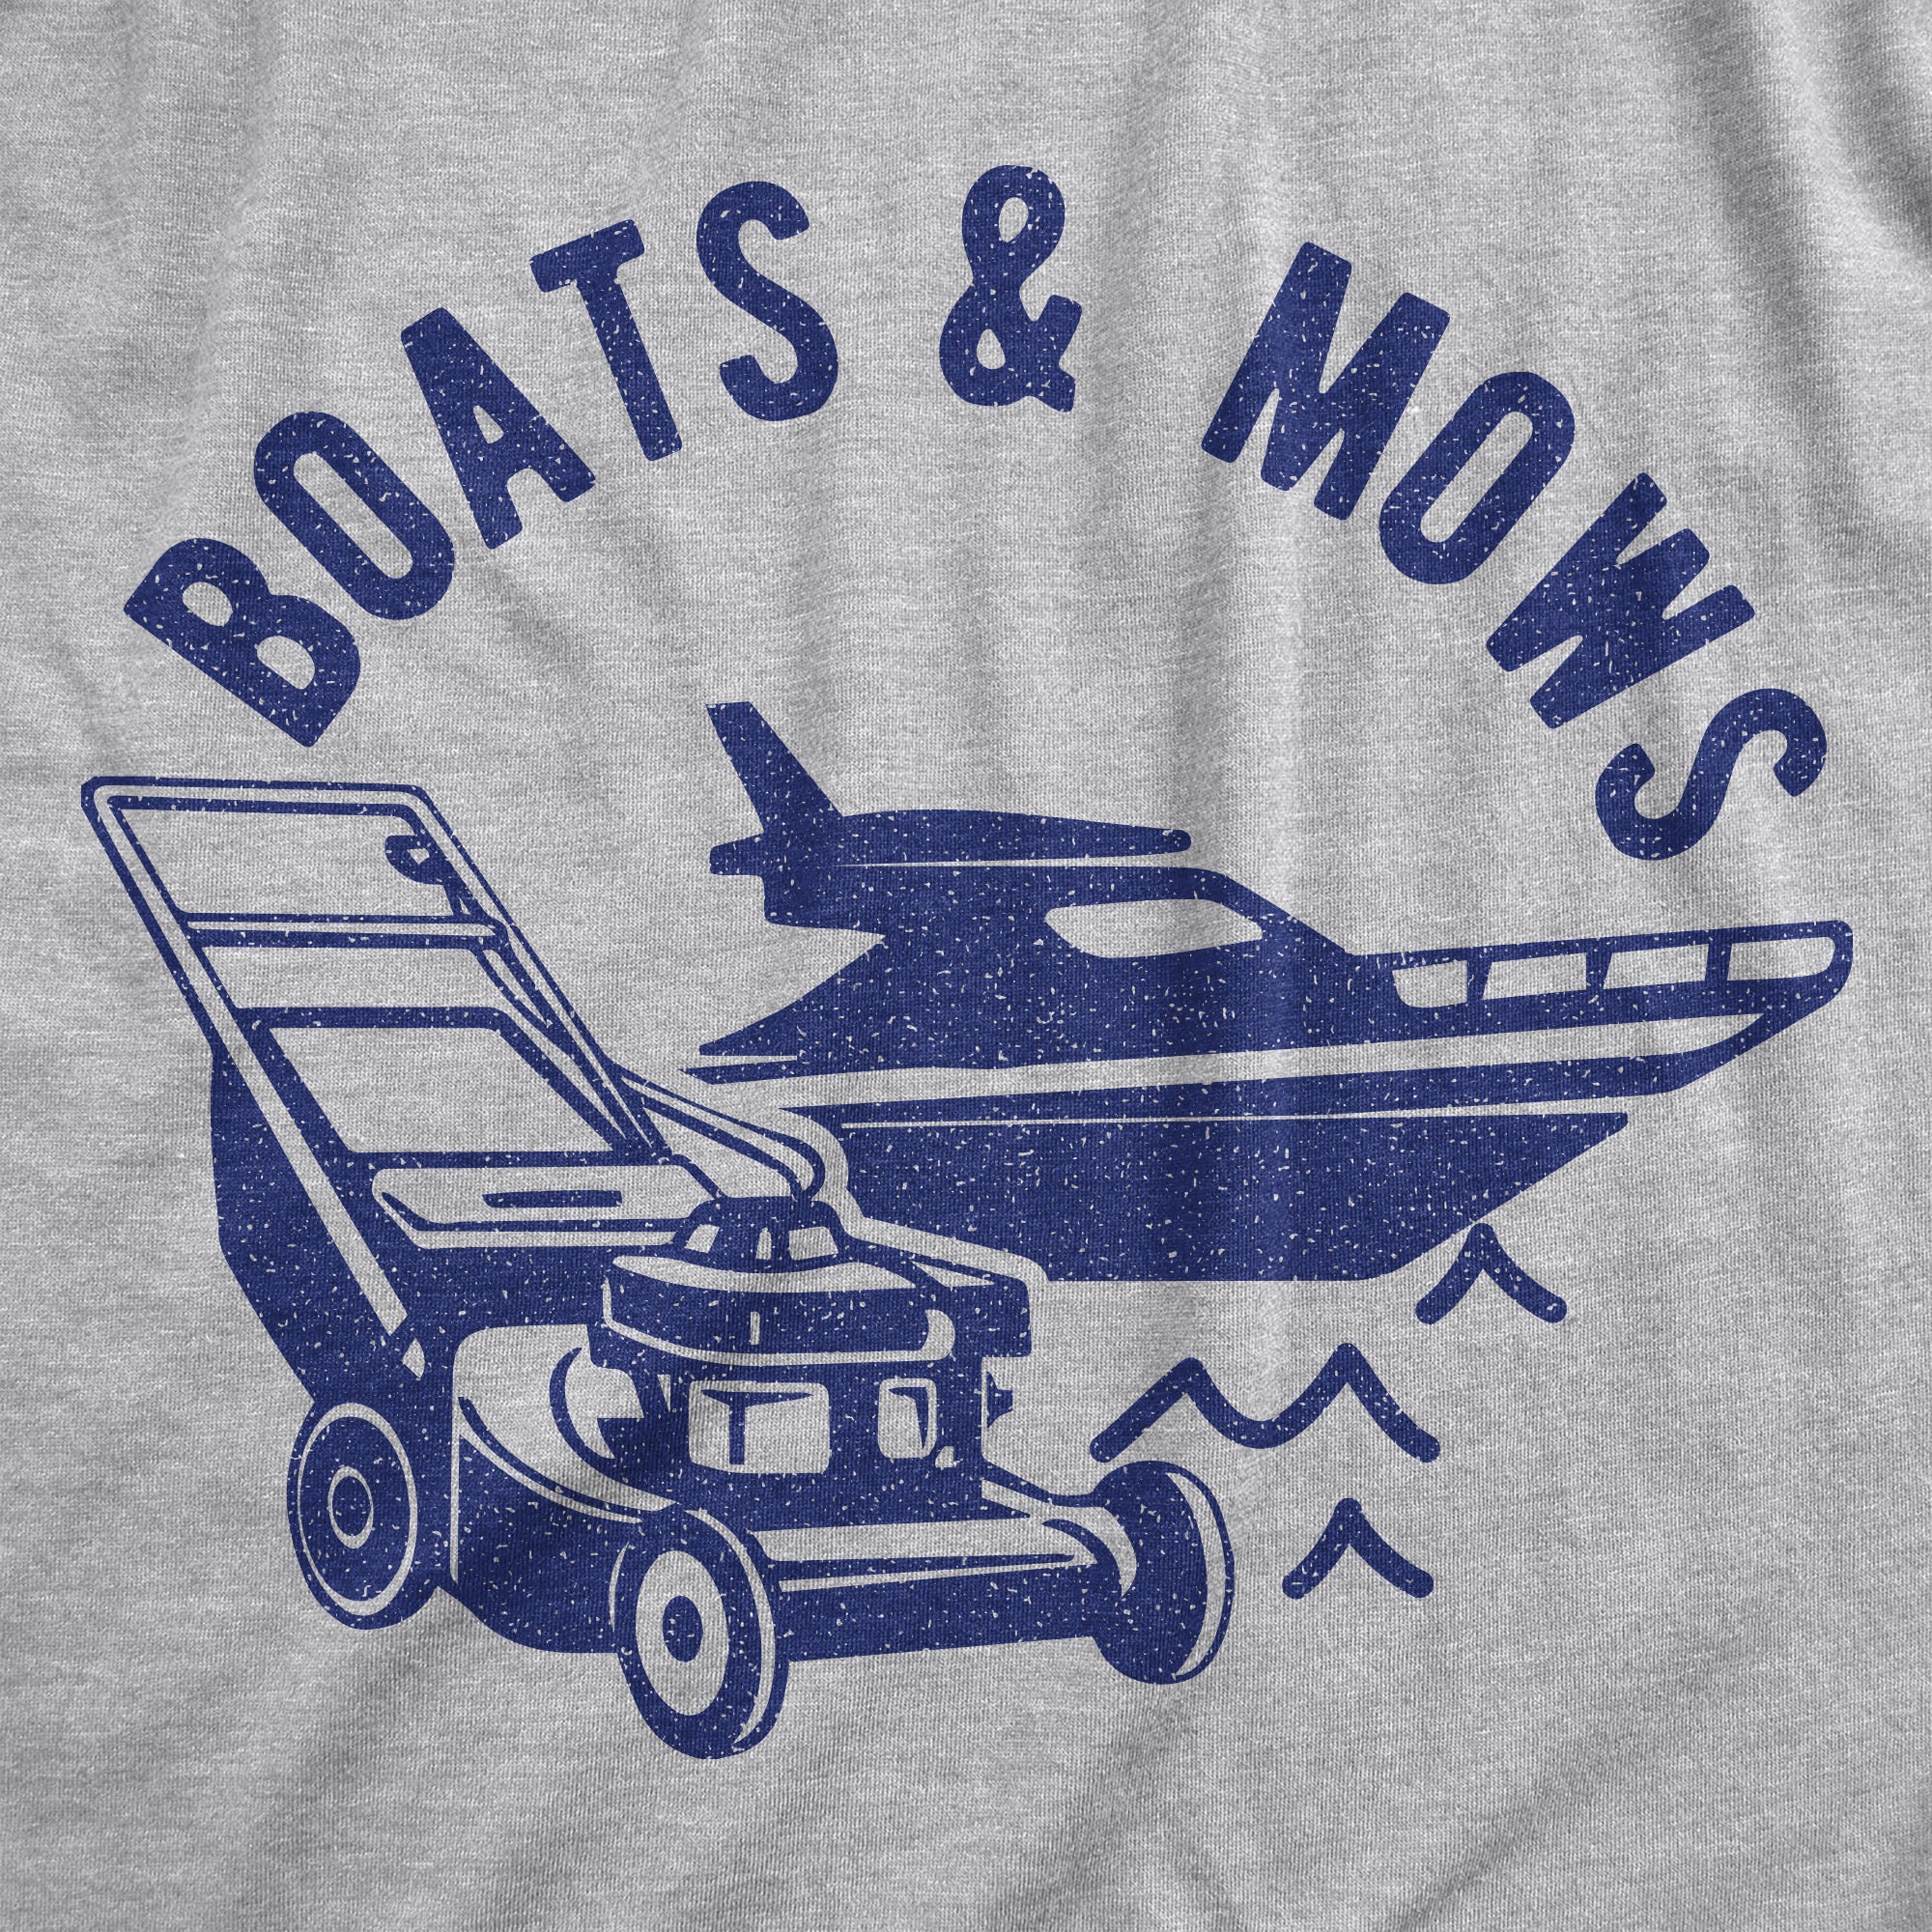 Funny Light Heather Grey - Boats and Mows Boats And Mows Mens T Shirt Nerdy Father's Day TV & Movies Tee